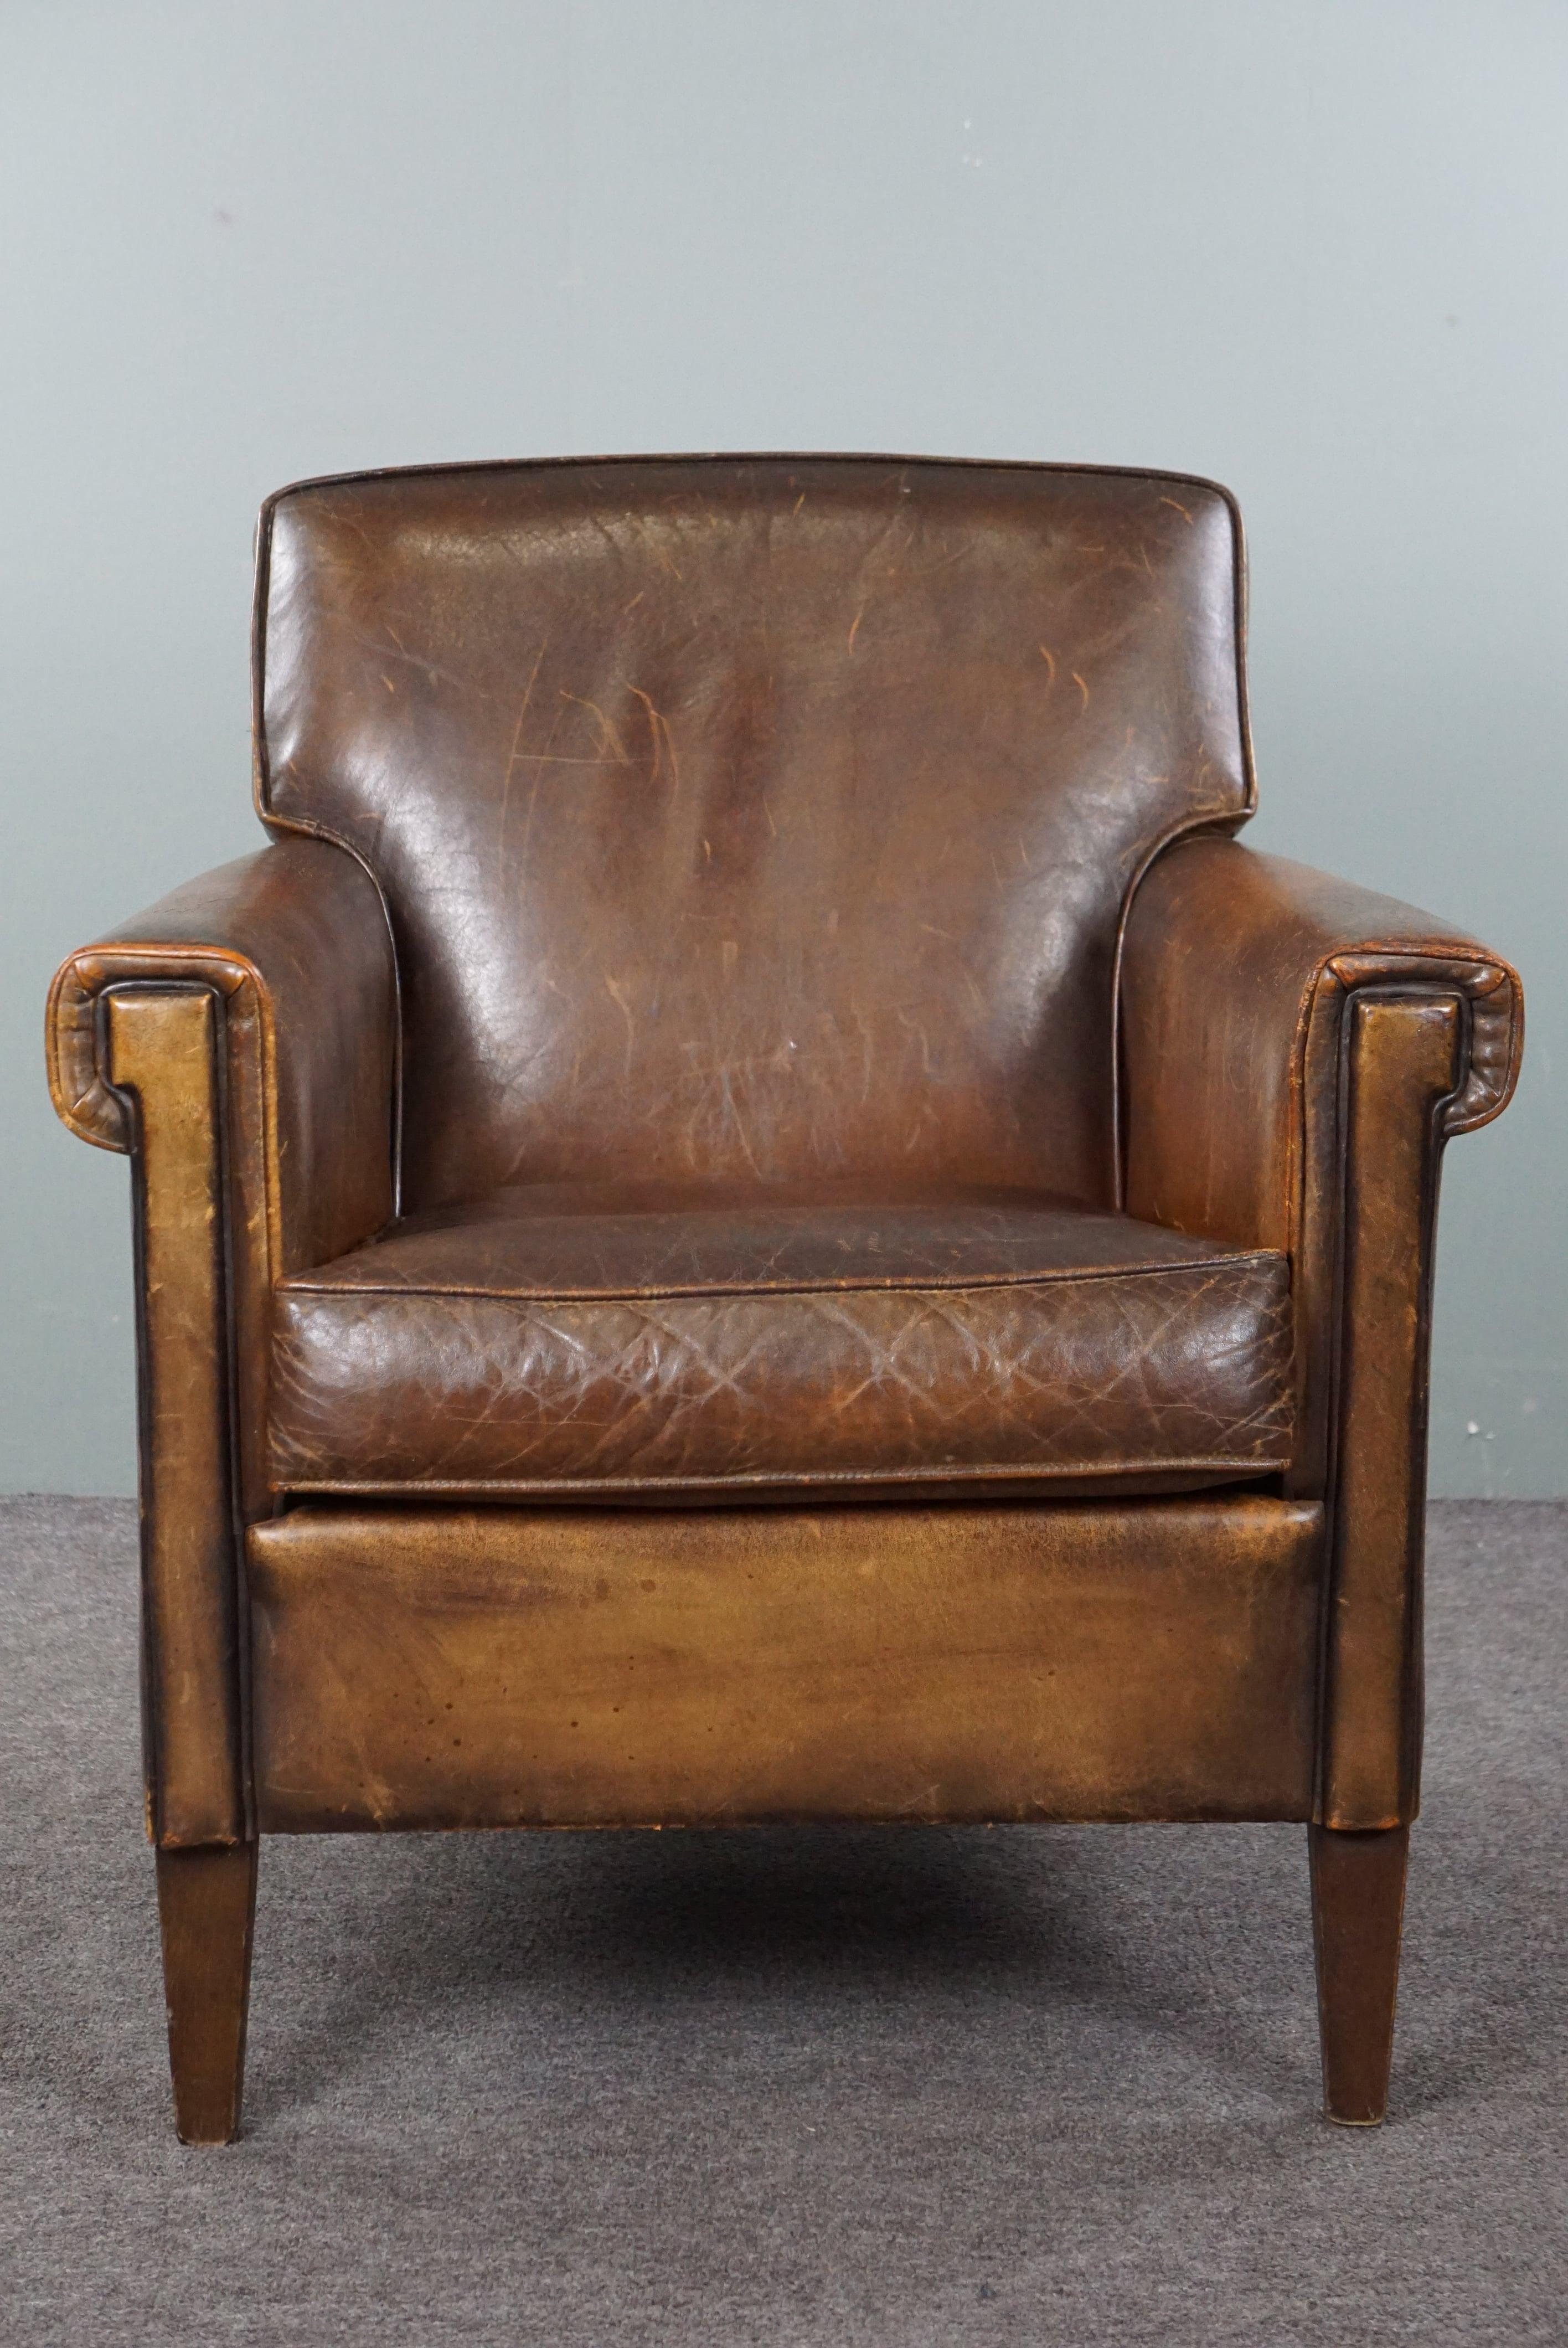 Offered is this stunning sheep leather armchair with a beautiful patina and charming details. Frankly, we're quite delighted to present this armchair to you. It's a model you don't often come across, and in our opinion, it's very beautiful and